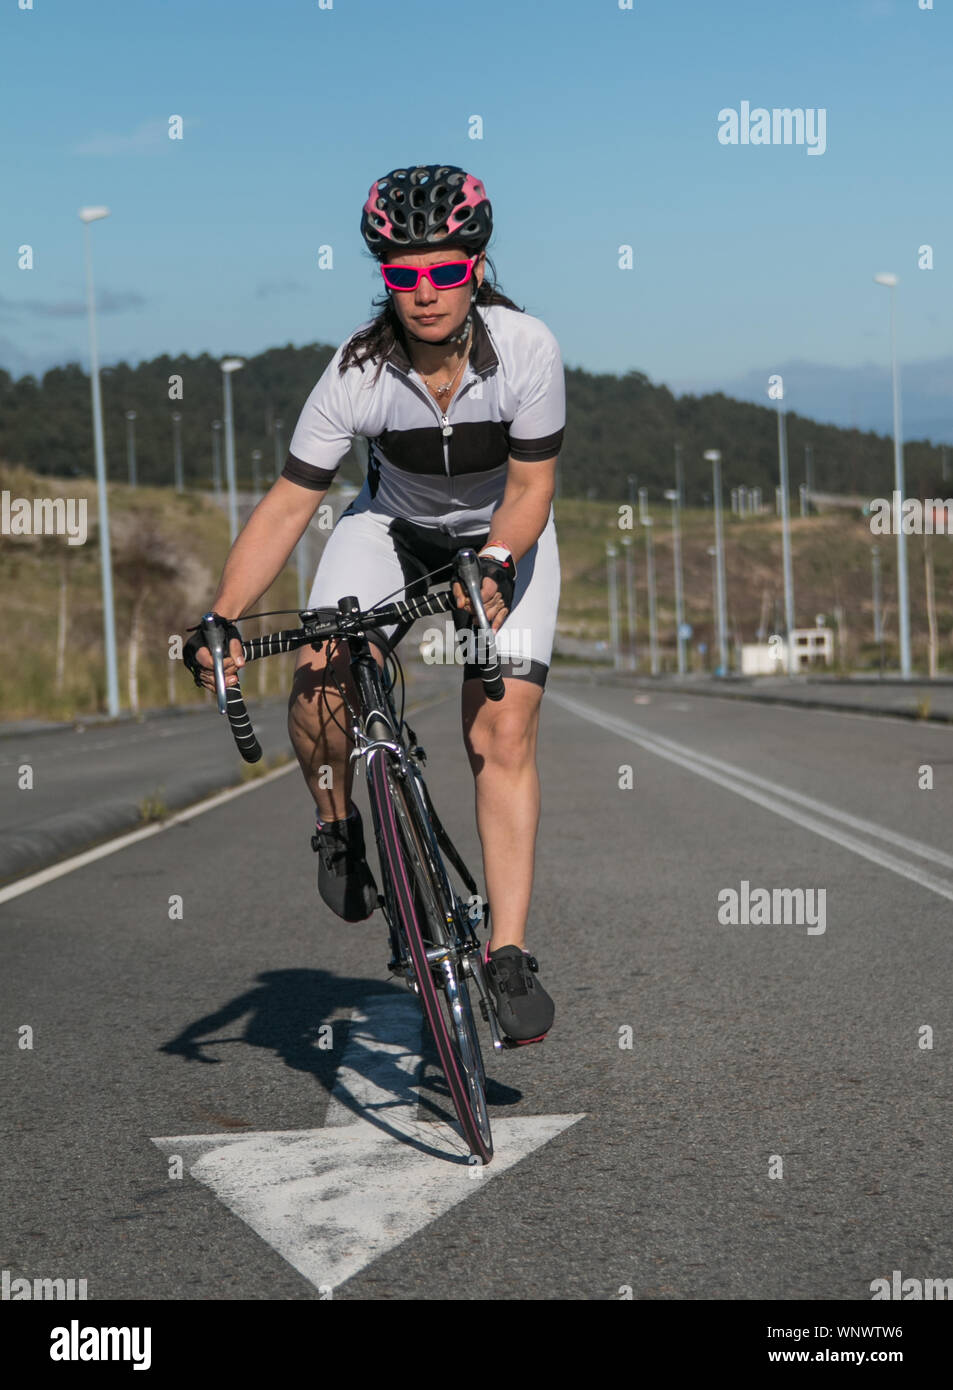 cyclist on road, competition Stock Photo